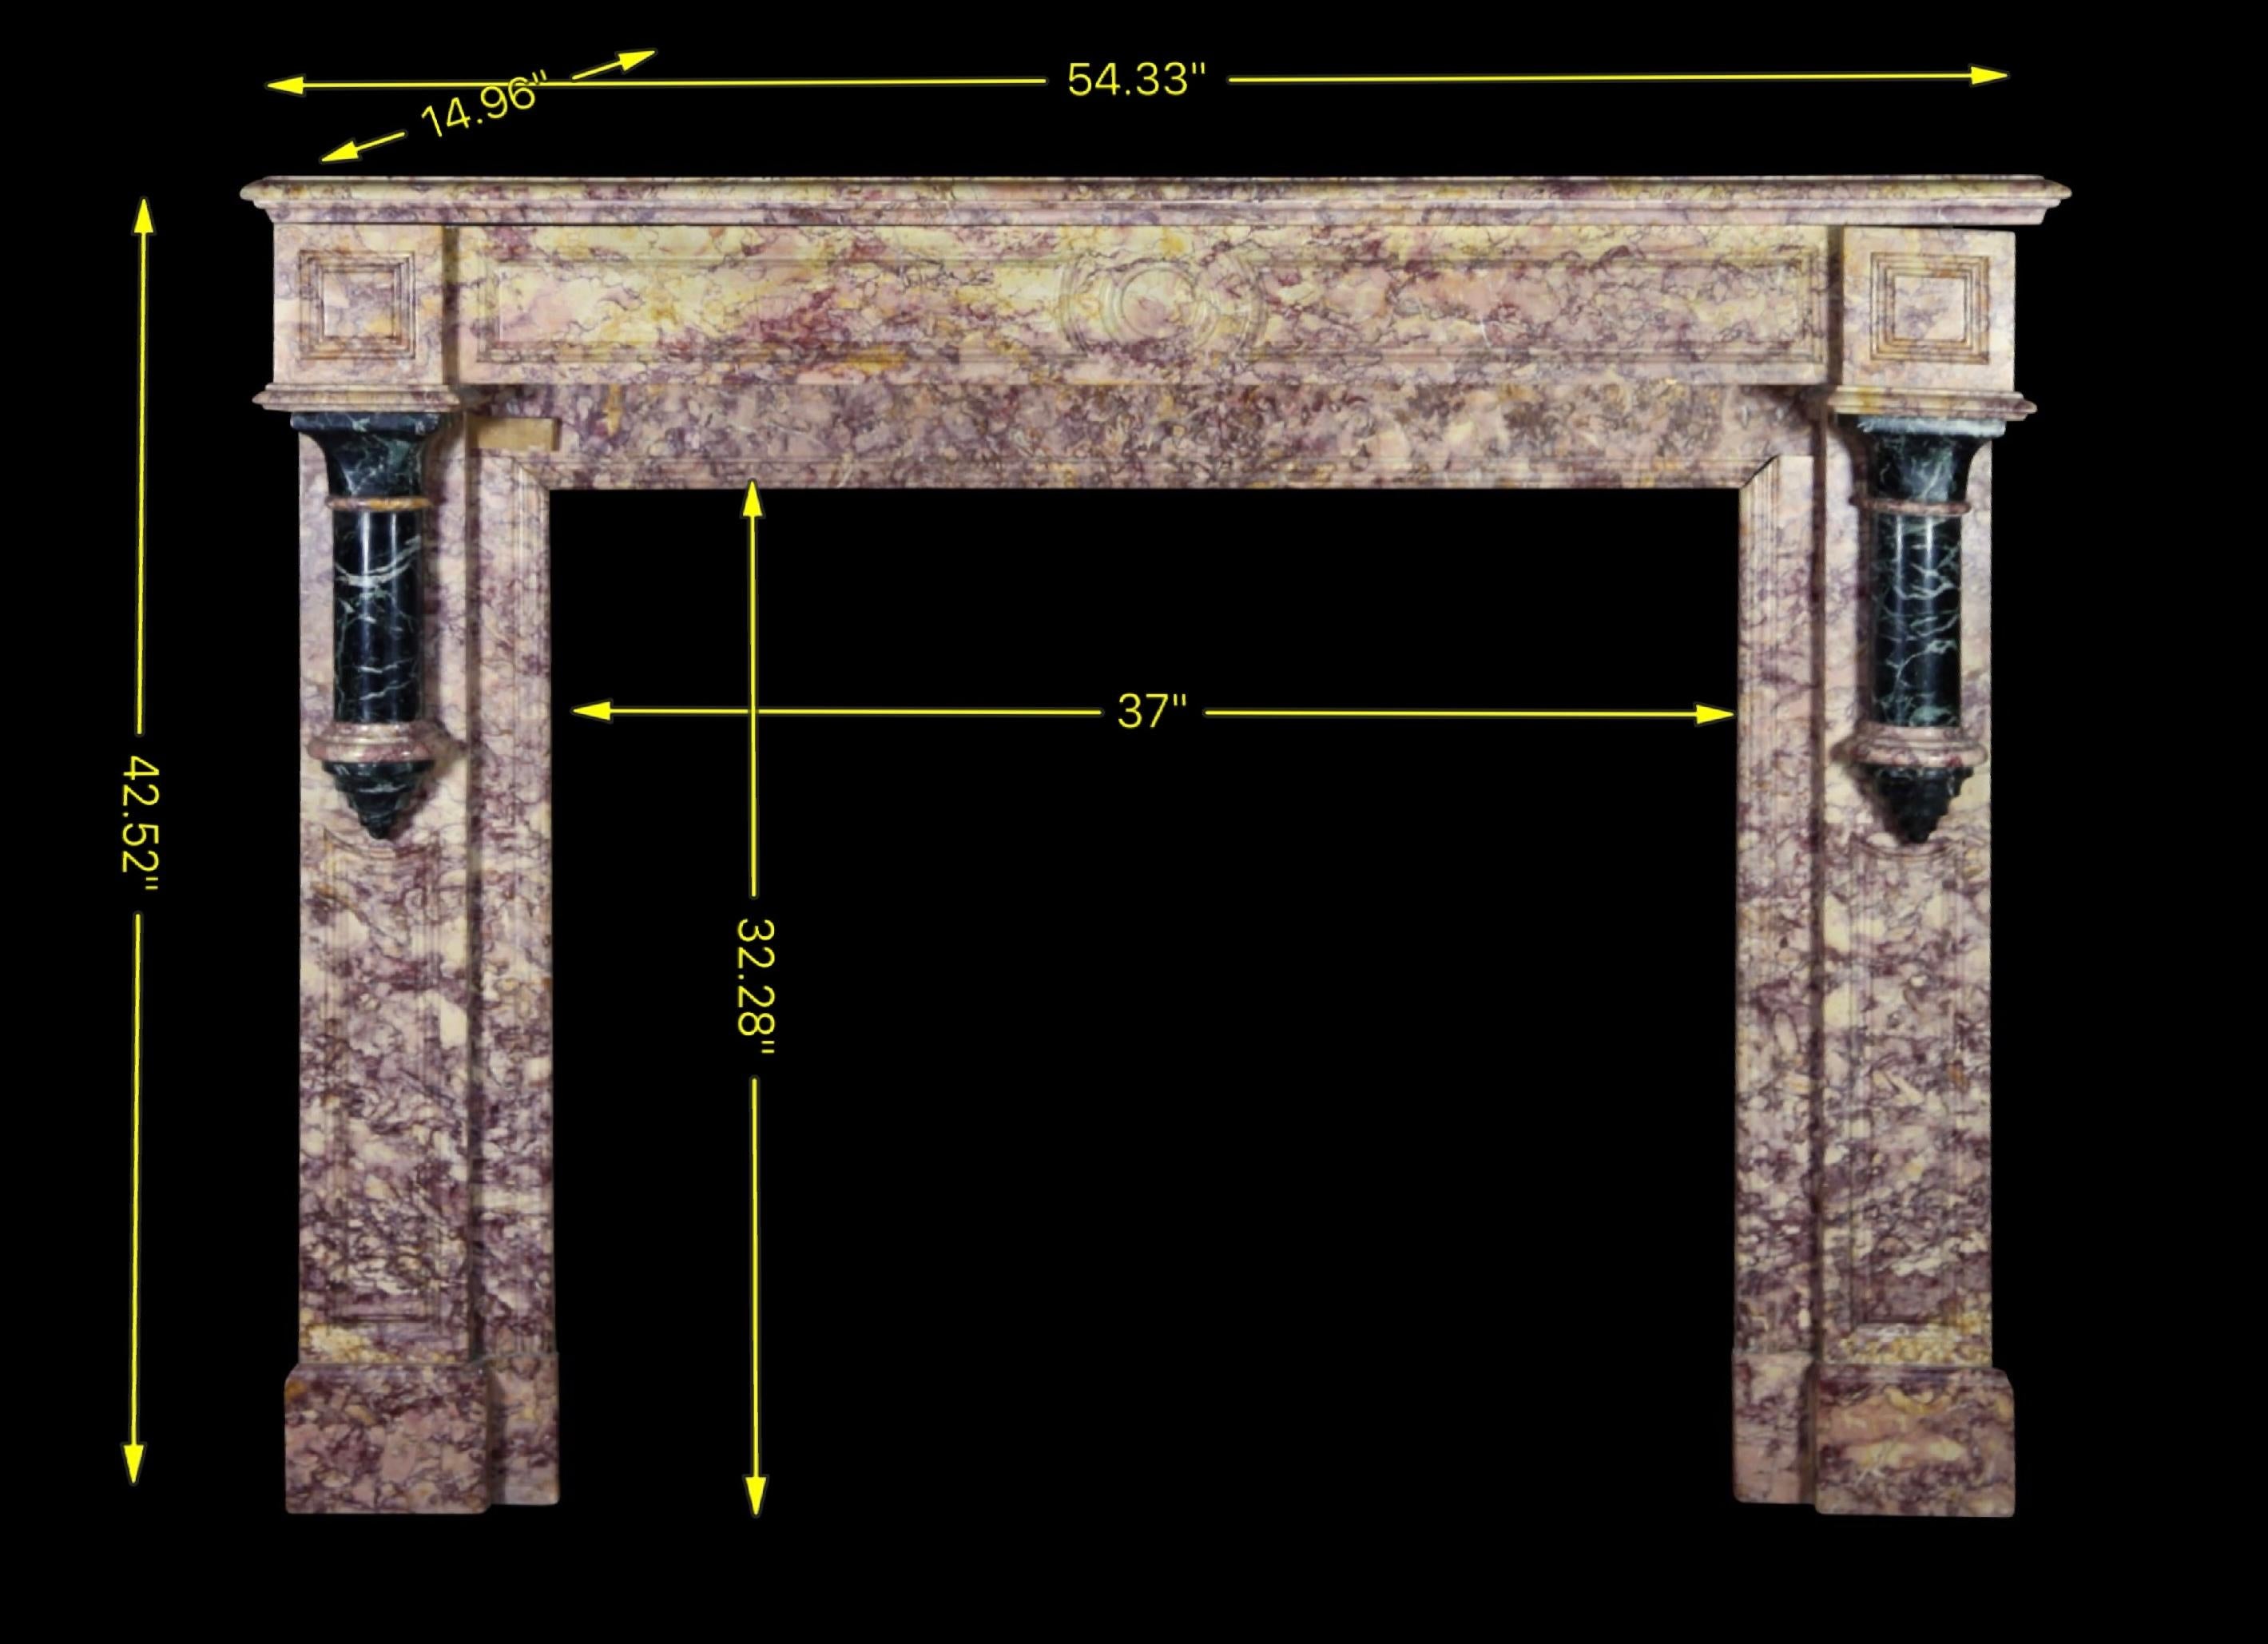 A Brocatelle D'Espagne marble original Art Deco period fireplace surround in combination with other marble details. It is an early 20th century mantle piece.
Dimensions:
138 cm Exterior Width 54,33 Inch
108 cm Exterior Height 42,52 Inch
94 cm